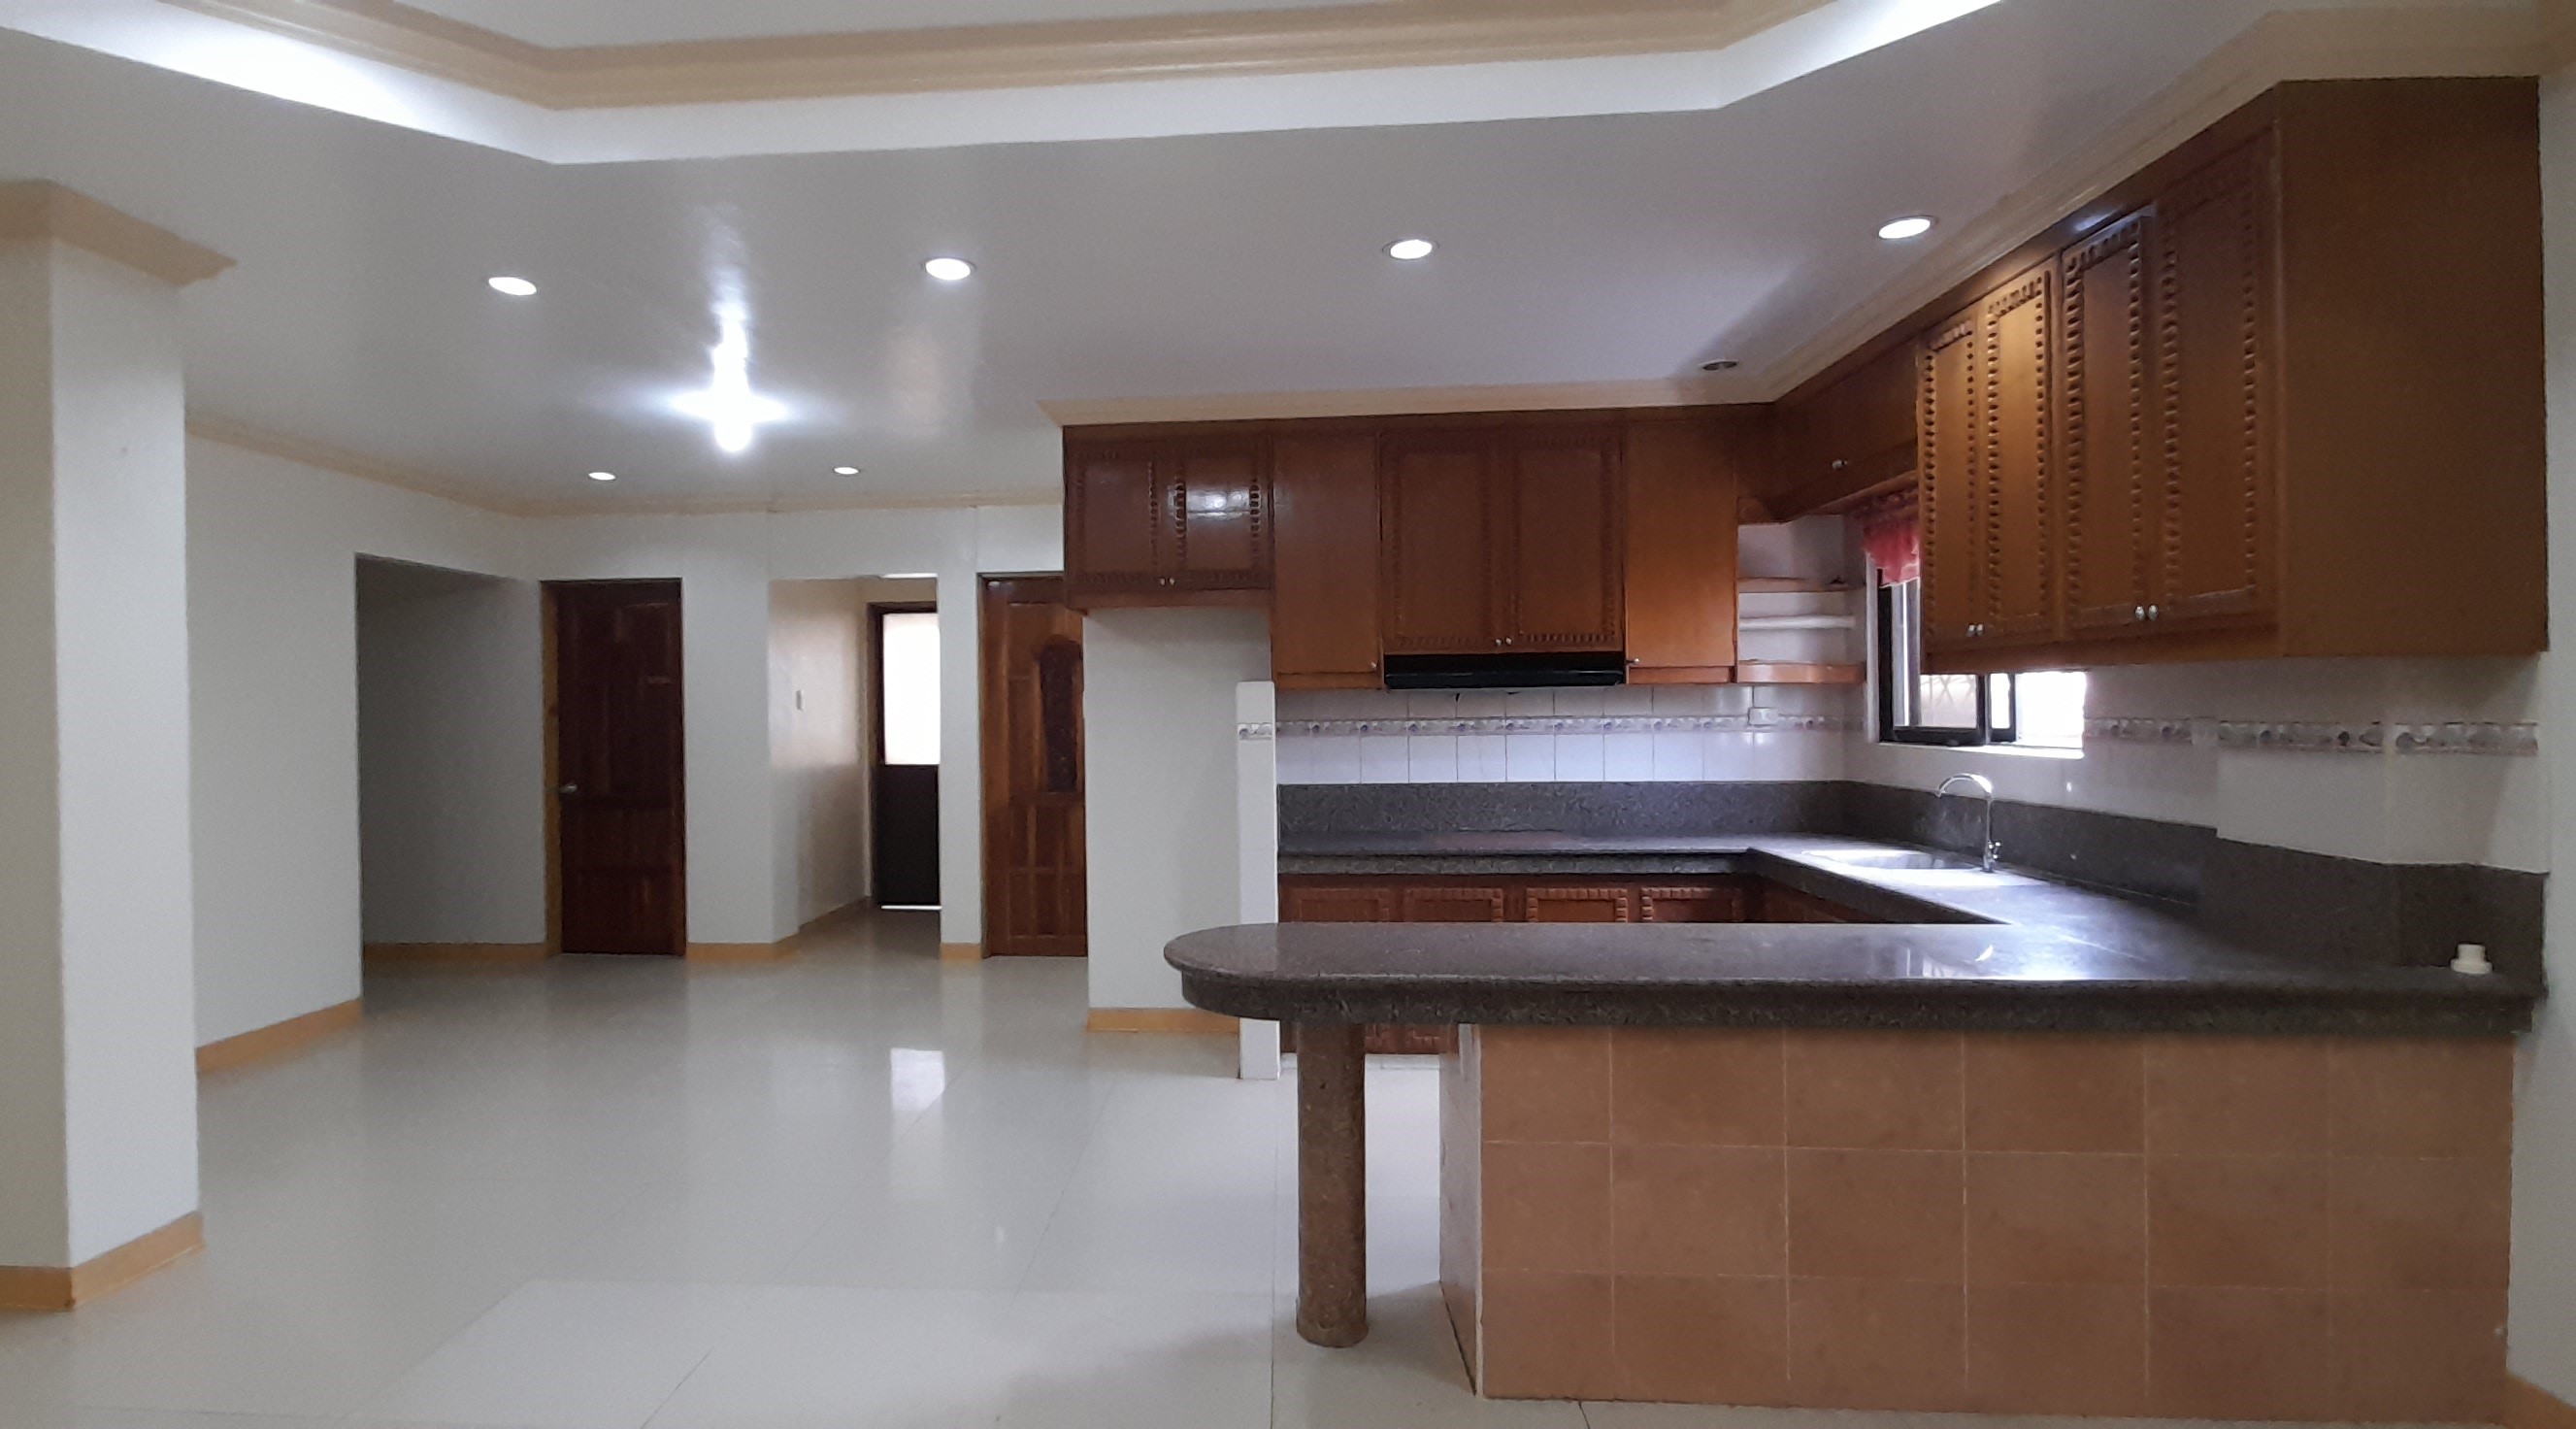 3-bedrooms-and-semi-furnished-apartment-in-banilad-cebu-city